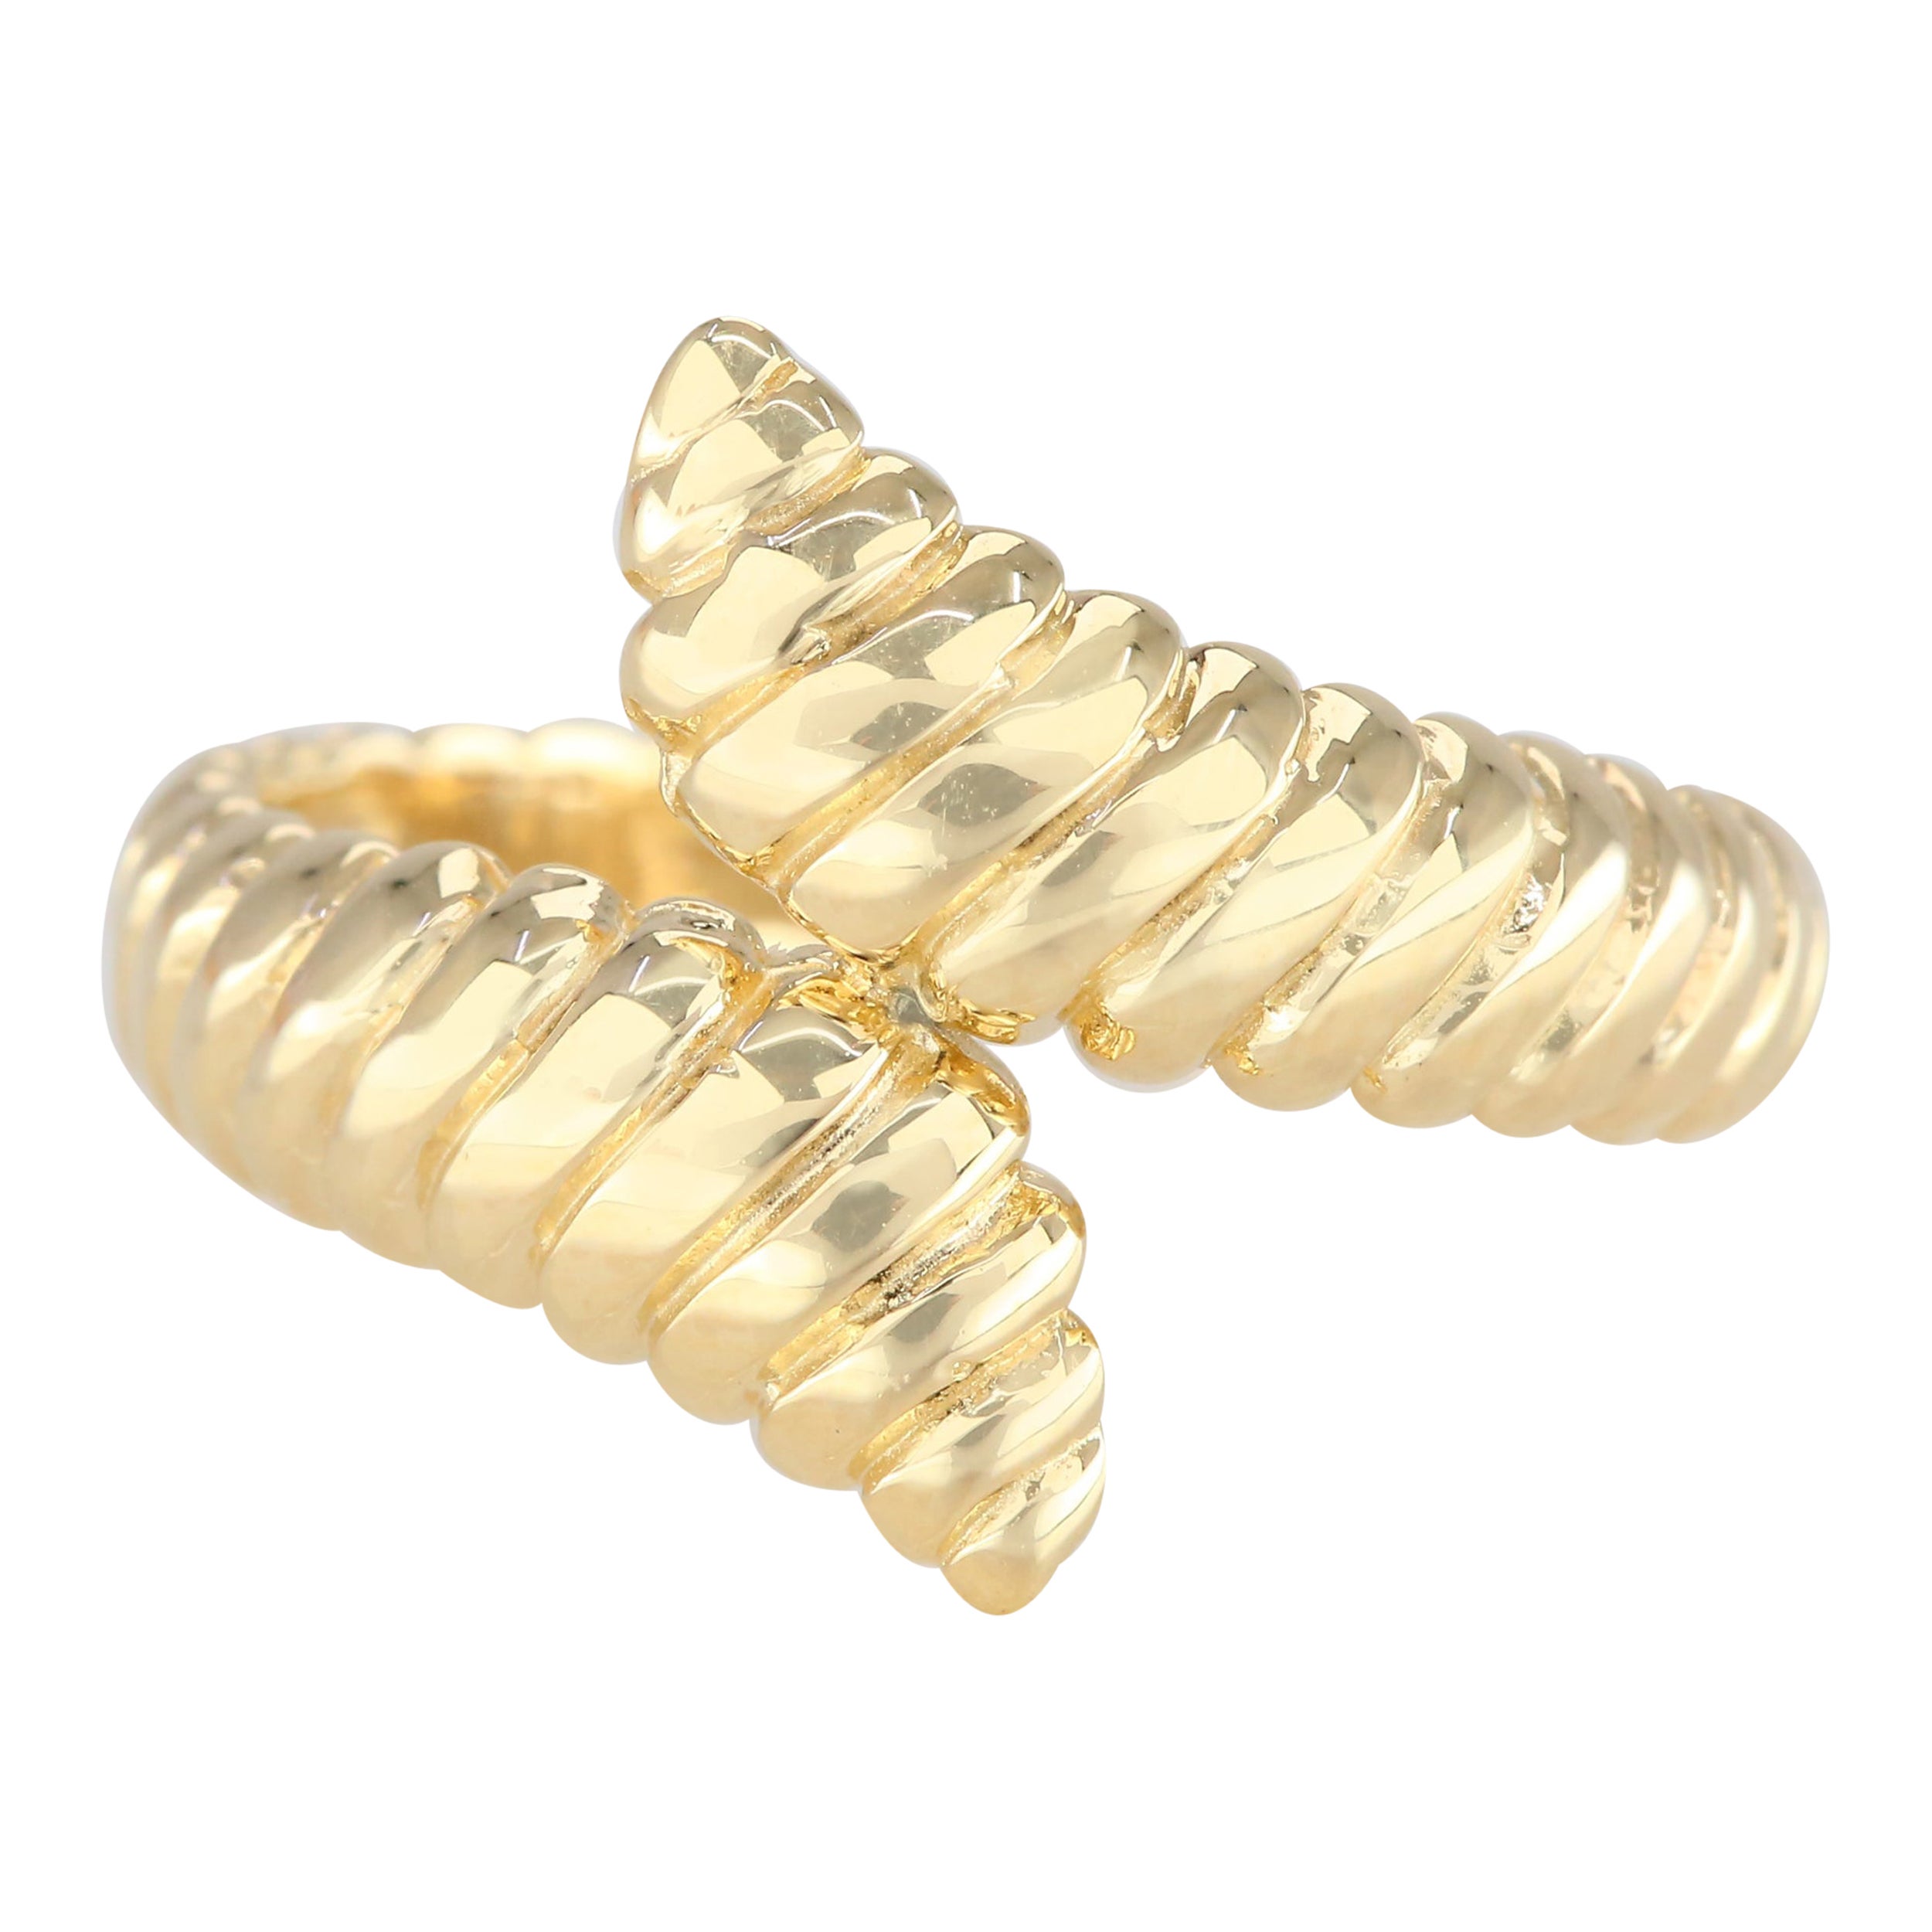 14K Gold Wavy Dome Ring, 14K Gold Croissant Ring, Wavy Croissant Ring